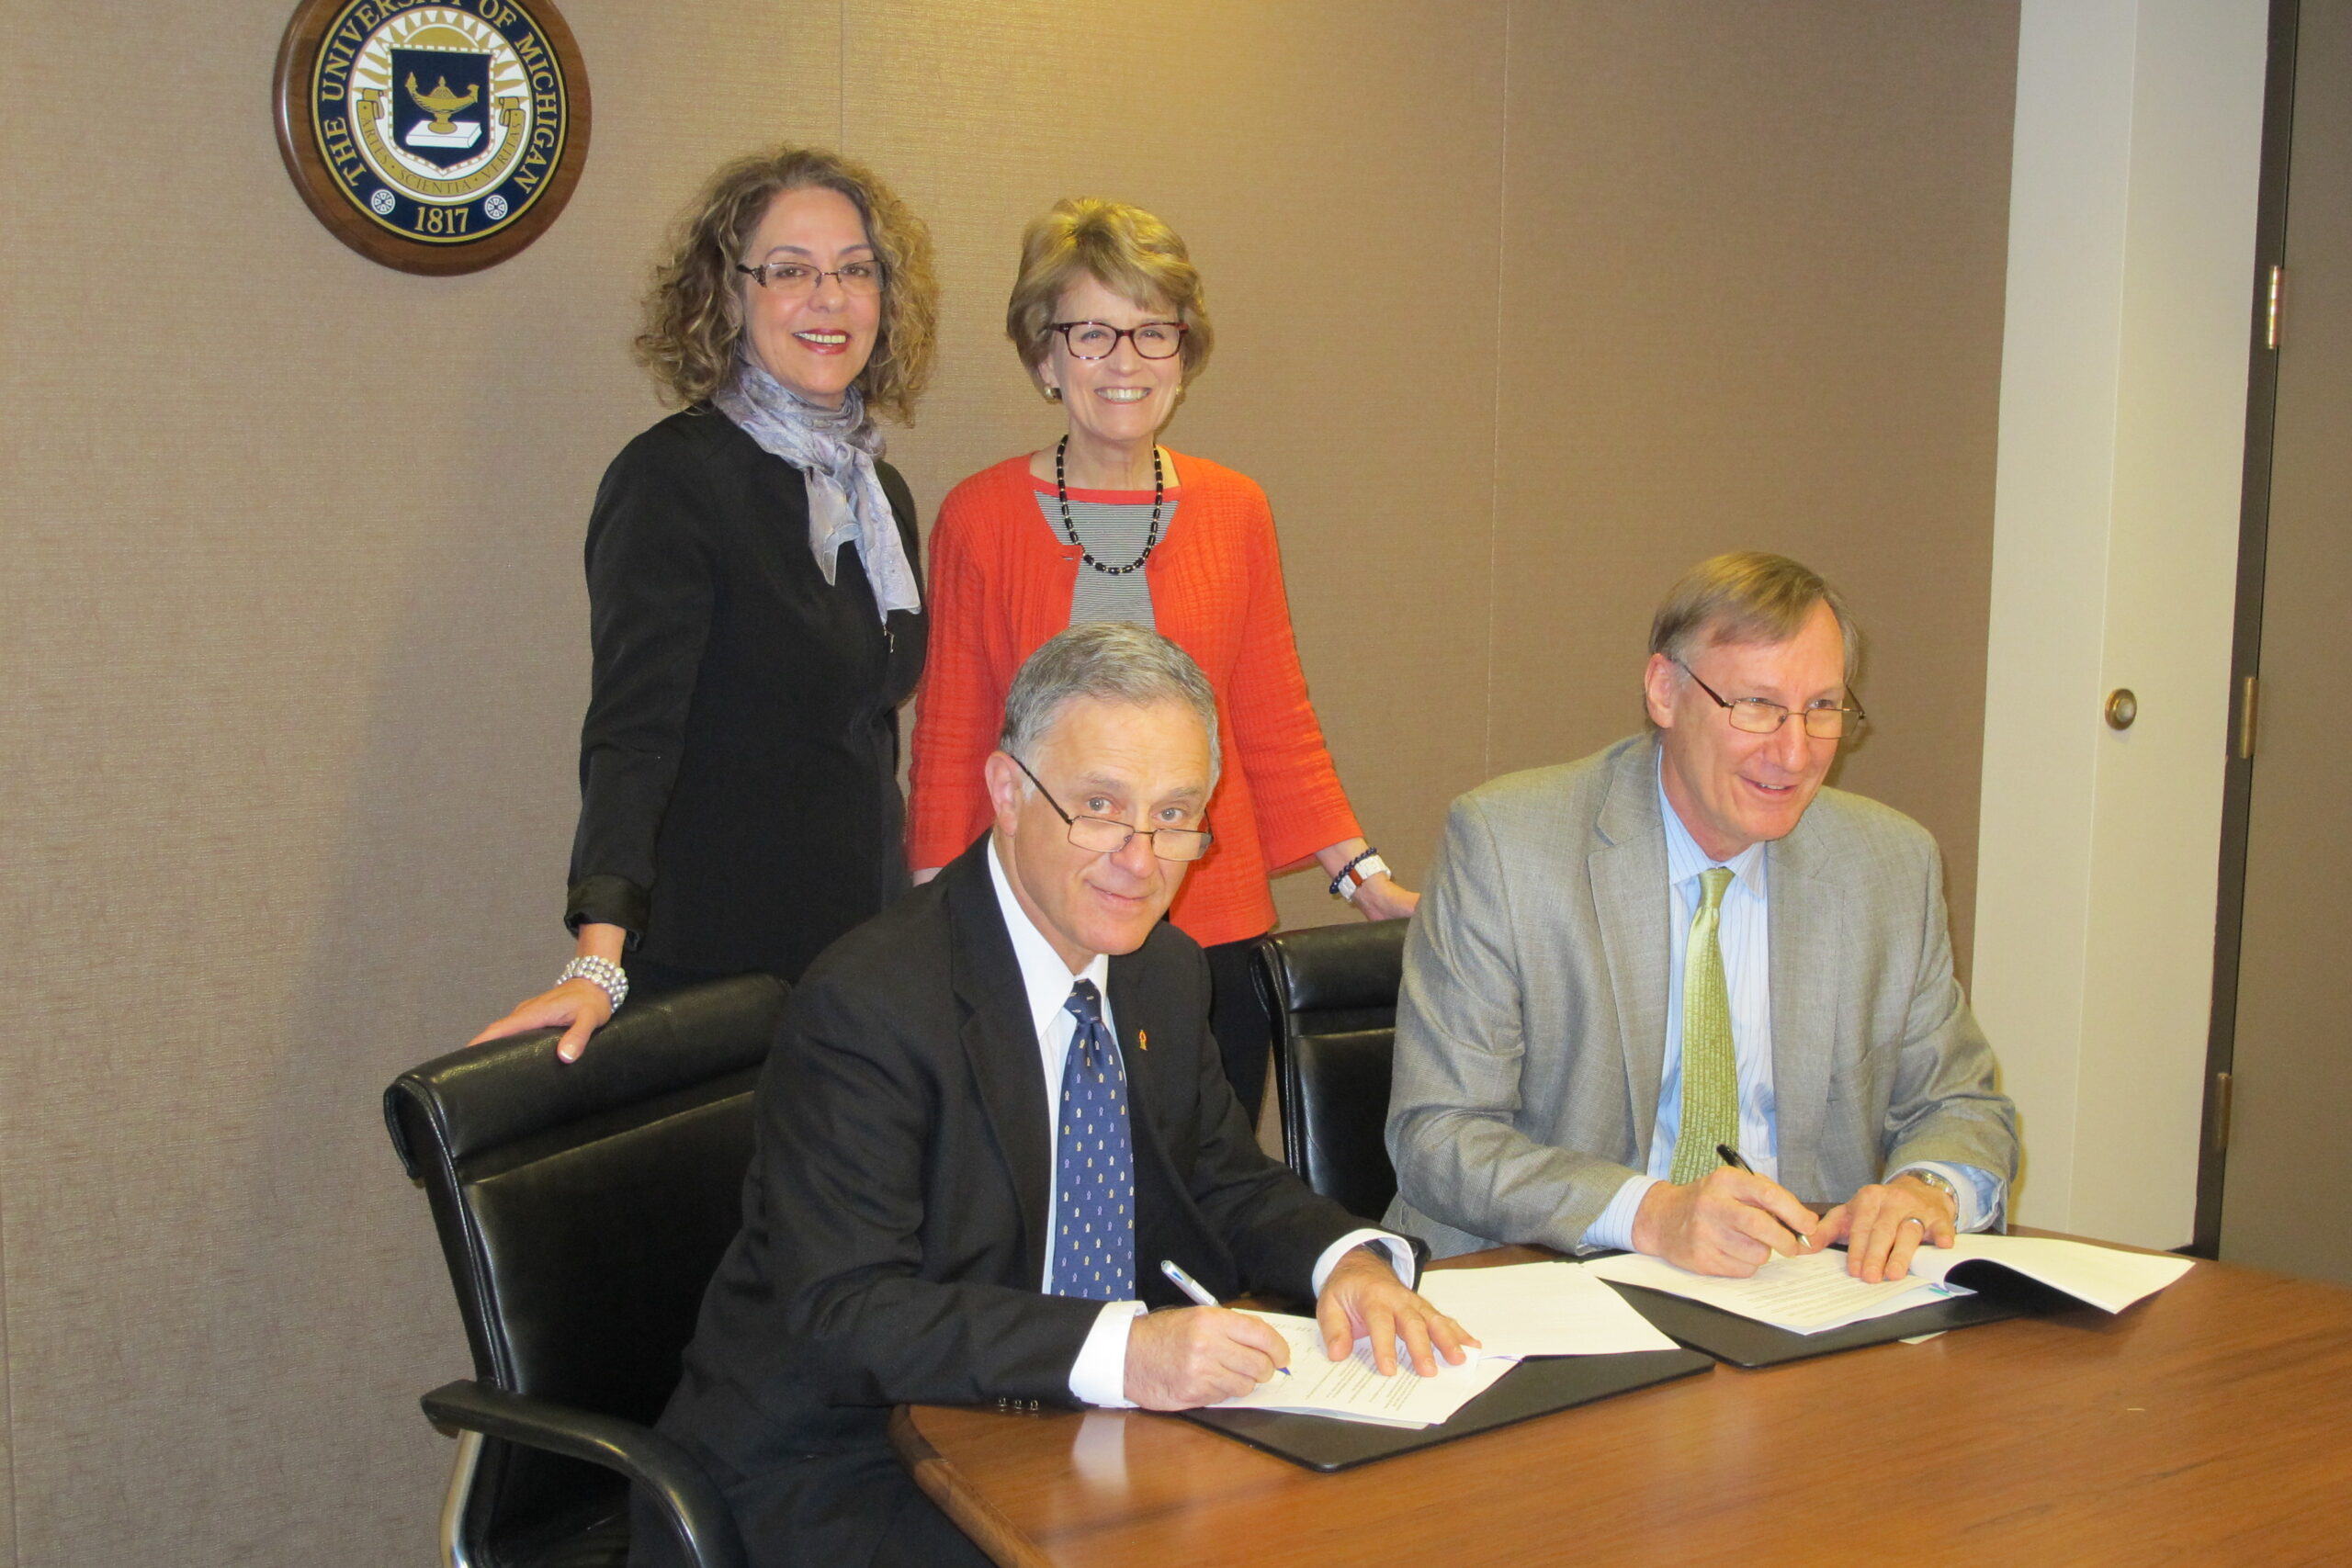 BGU Vice President and Dean for Research and Development Moti Herskowitz, U-M Vice President for Research Stephen Forrest, Ben-Gurion President Rivka Carmi and U-M President Mary Sue Coleman sign MoU. (Photo: Scott Soderberg, Michigan Photography)